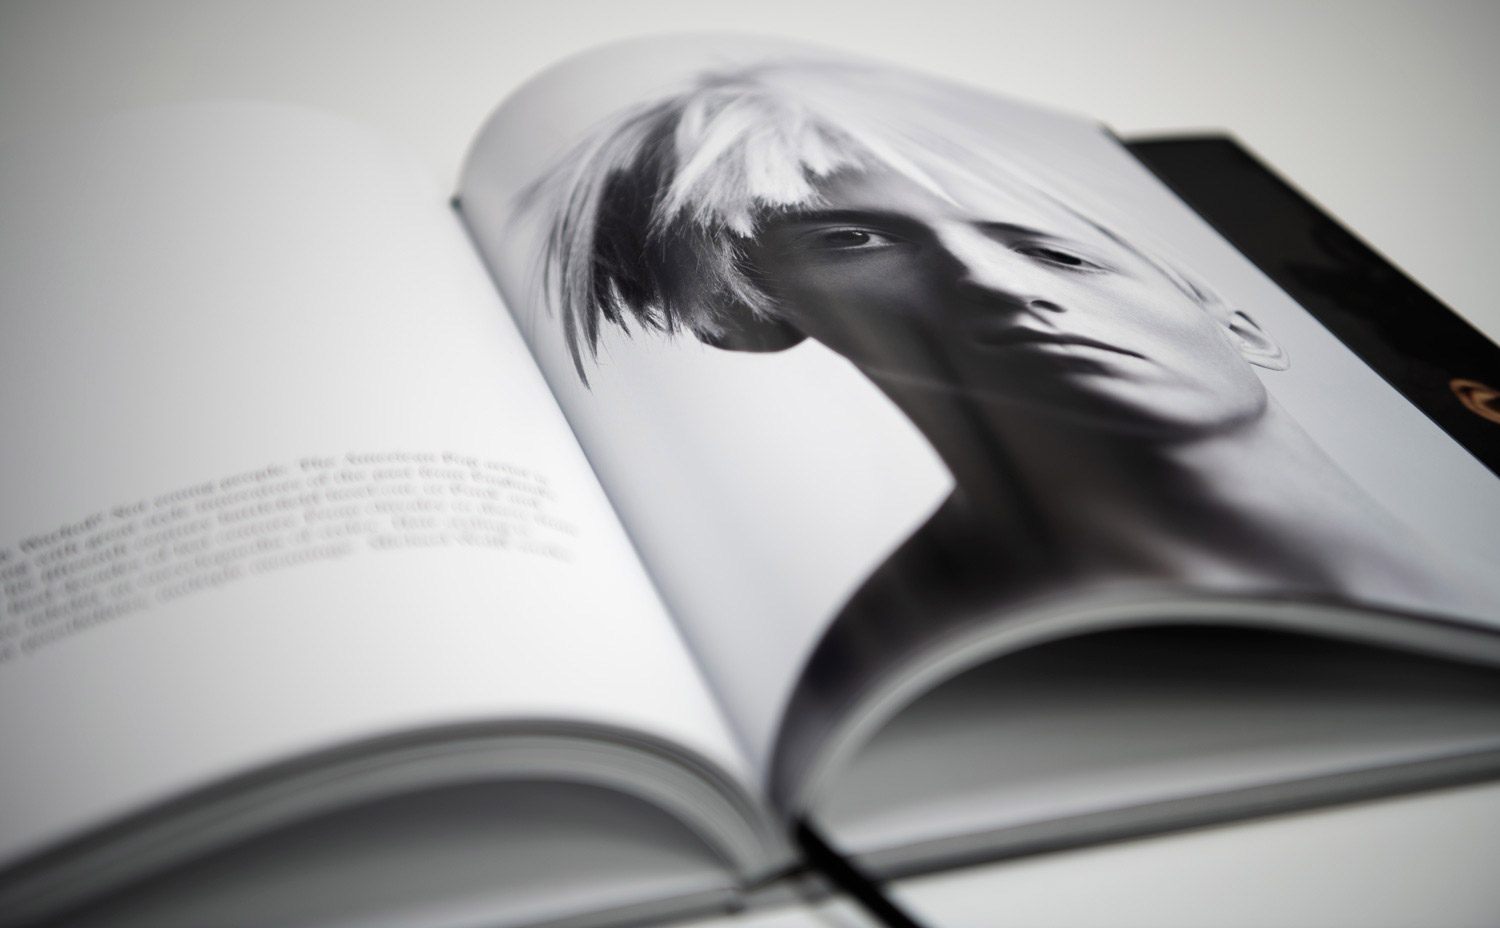 Hair Unlimited Book - Black and White Image + Text - Imagination Graphics